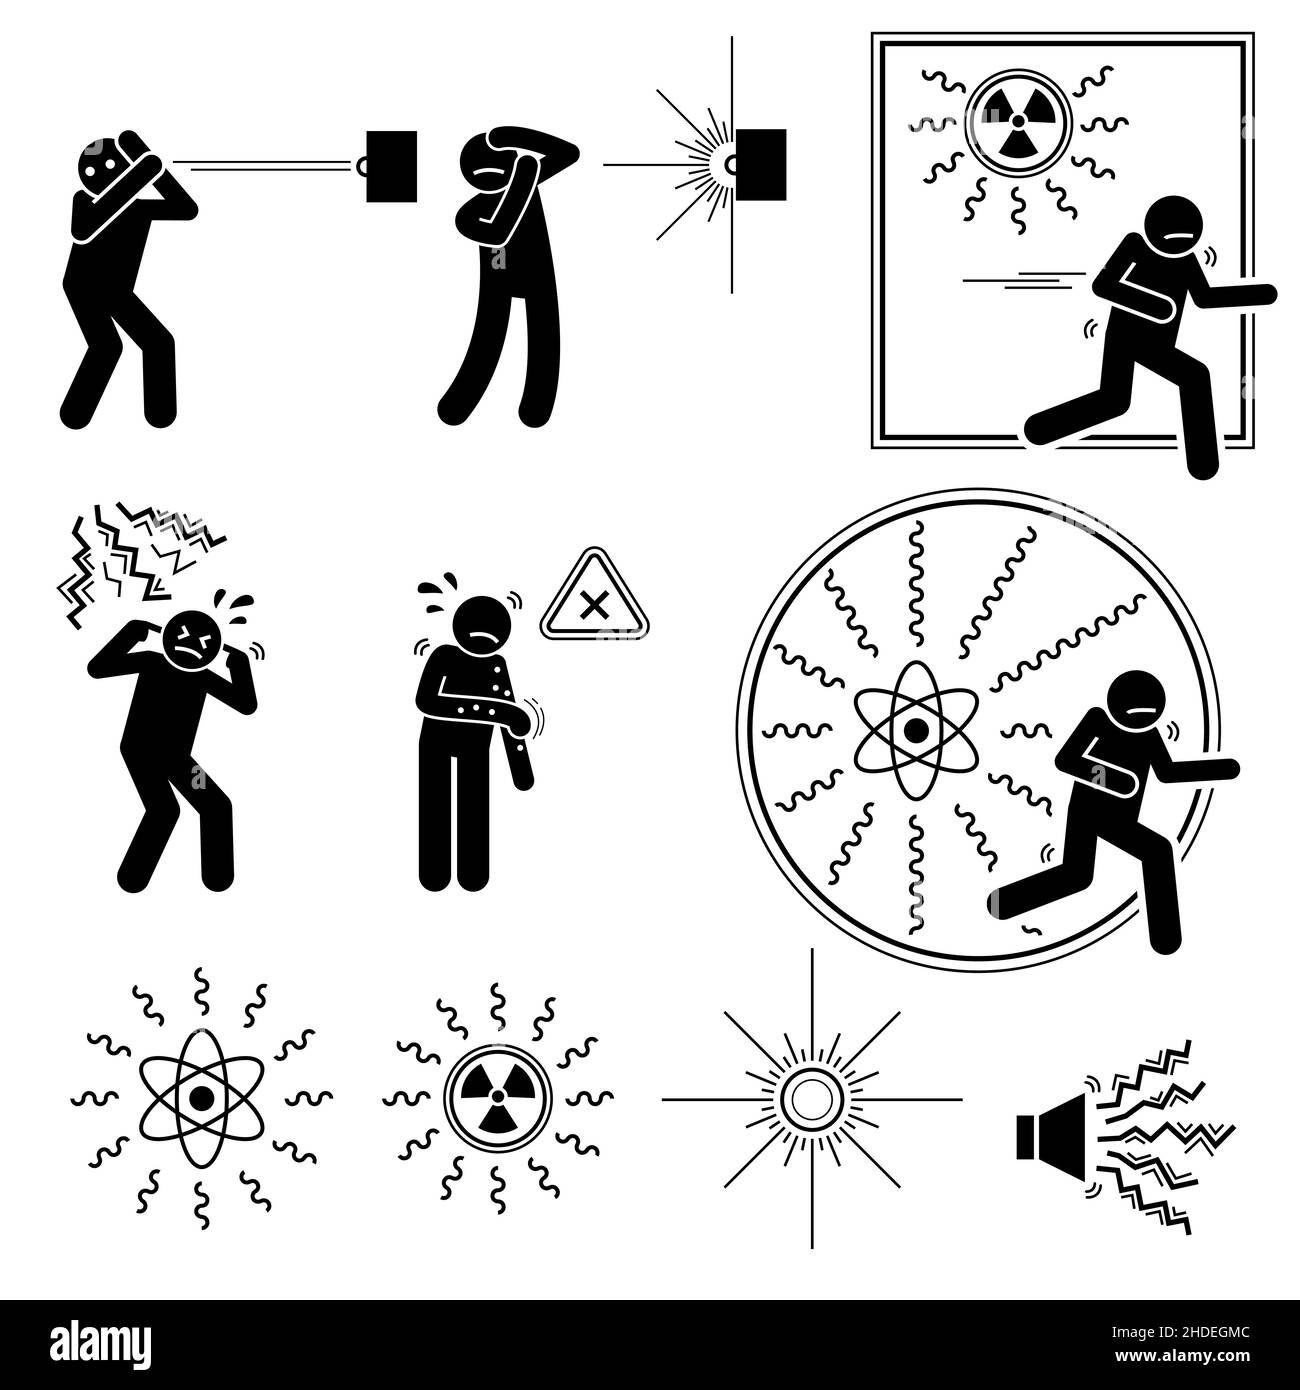 Radioactive hazard, biohazard, UV optical ray light, X-ray radiation, loud noise, and irritant to human. Warning sign, danger risk symbol, and safety Stock Vector